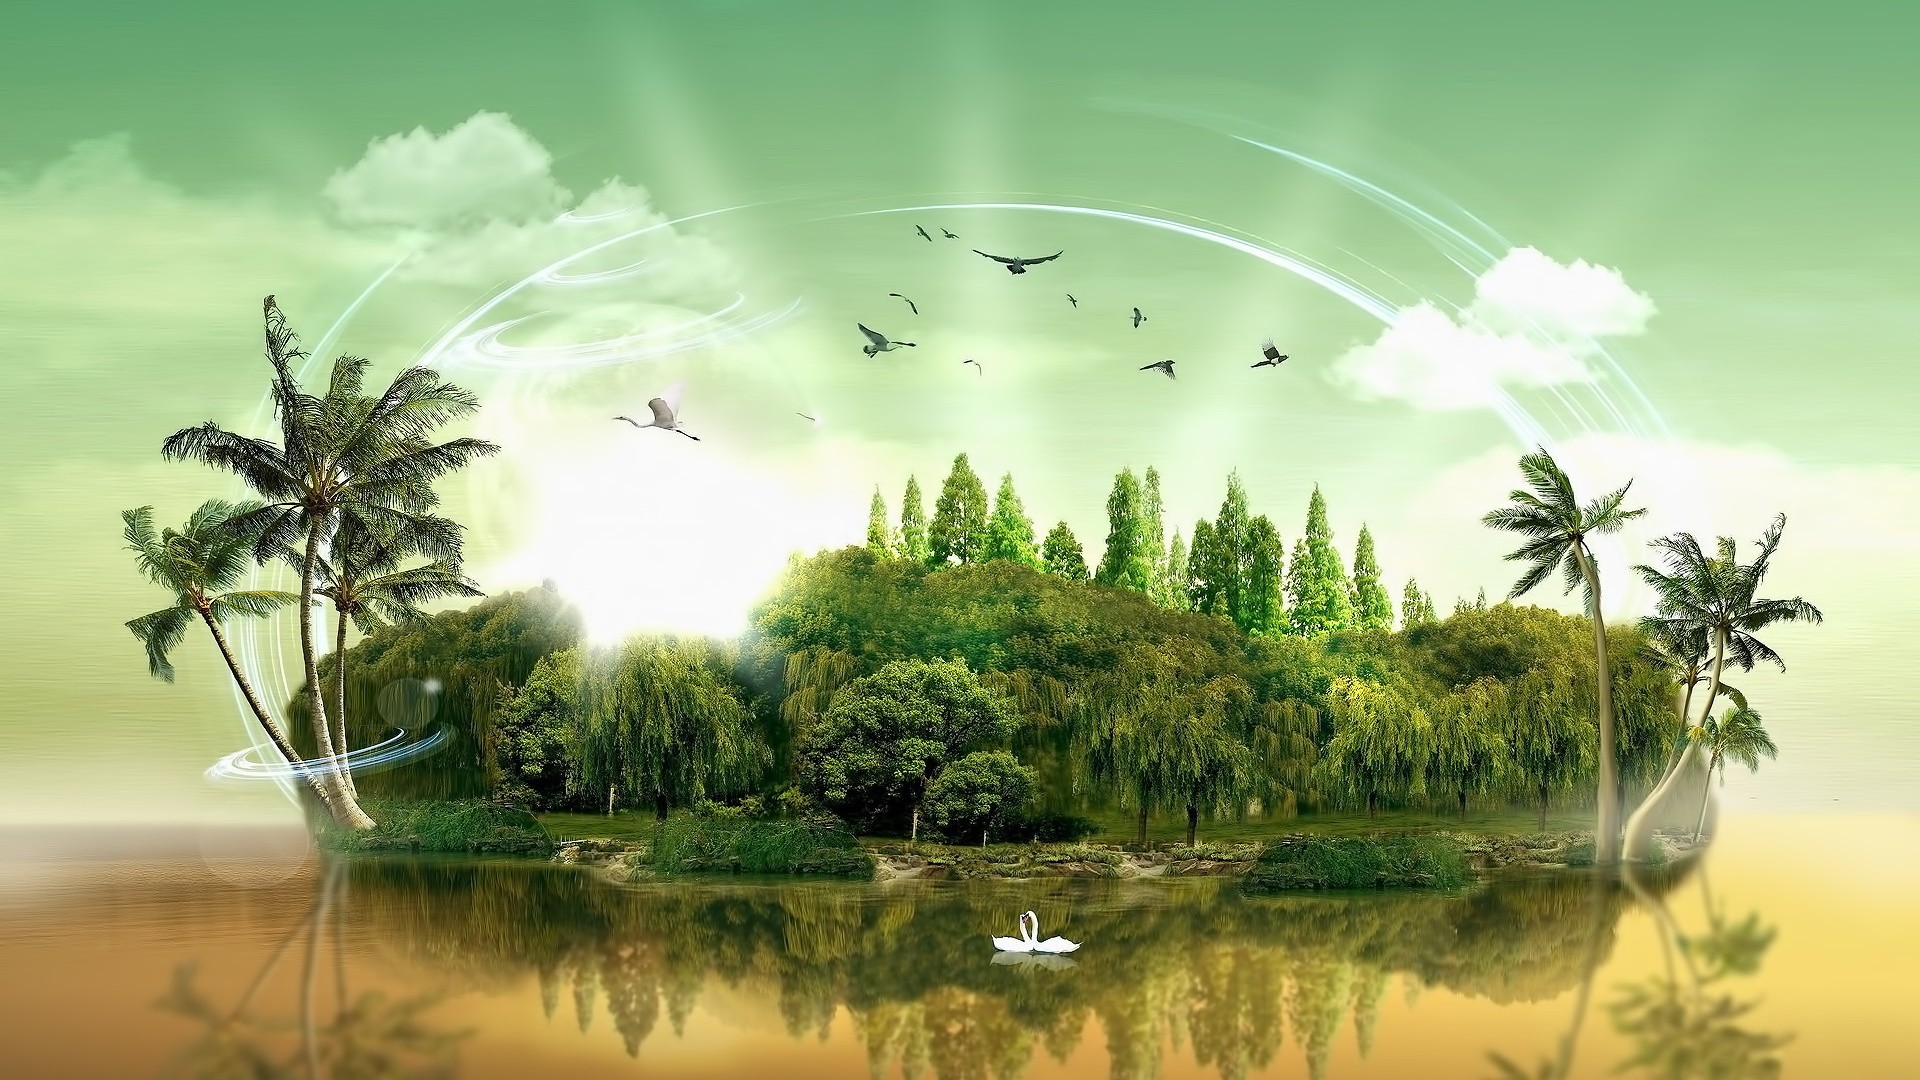 General 1920x1080 digital art nature landscape grass island water trees forest palm trees birds swans clouds reflection light trails